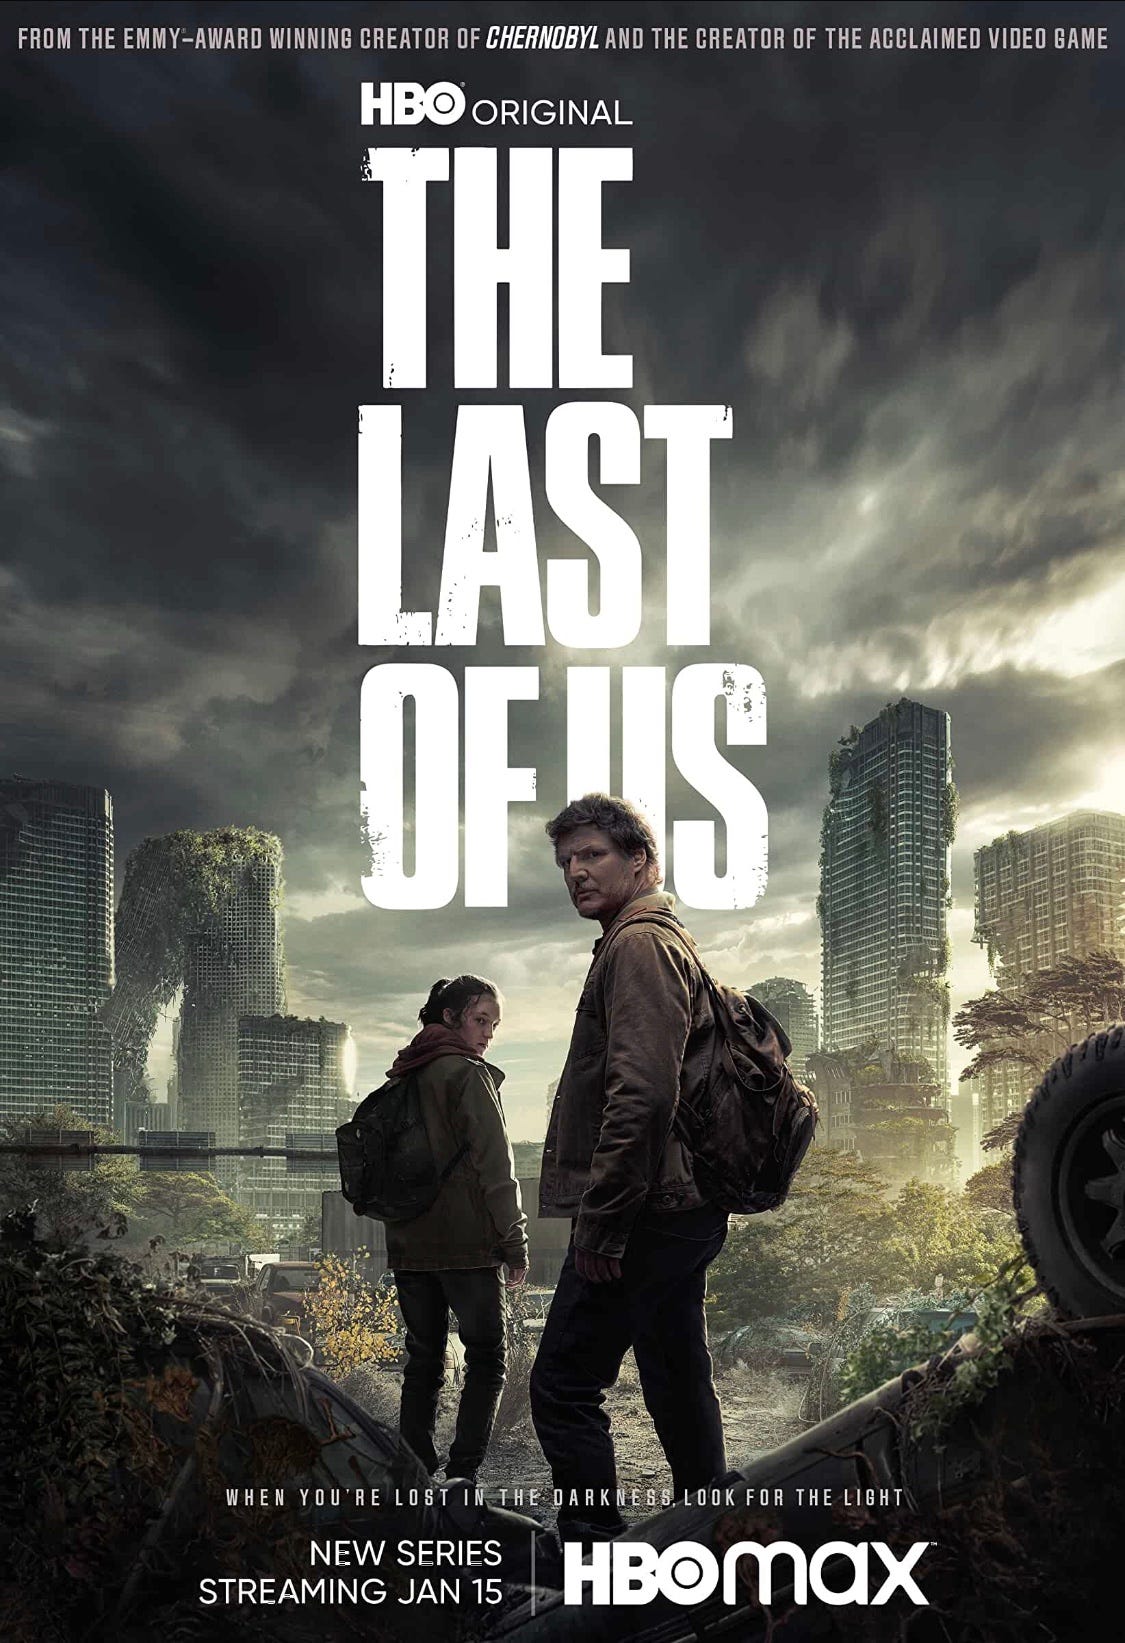 How the Premiere of The Last of Us Differed From the Video Game